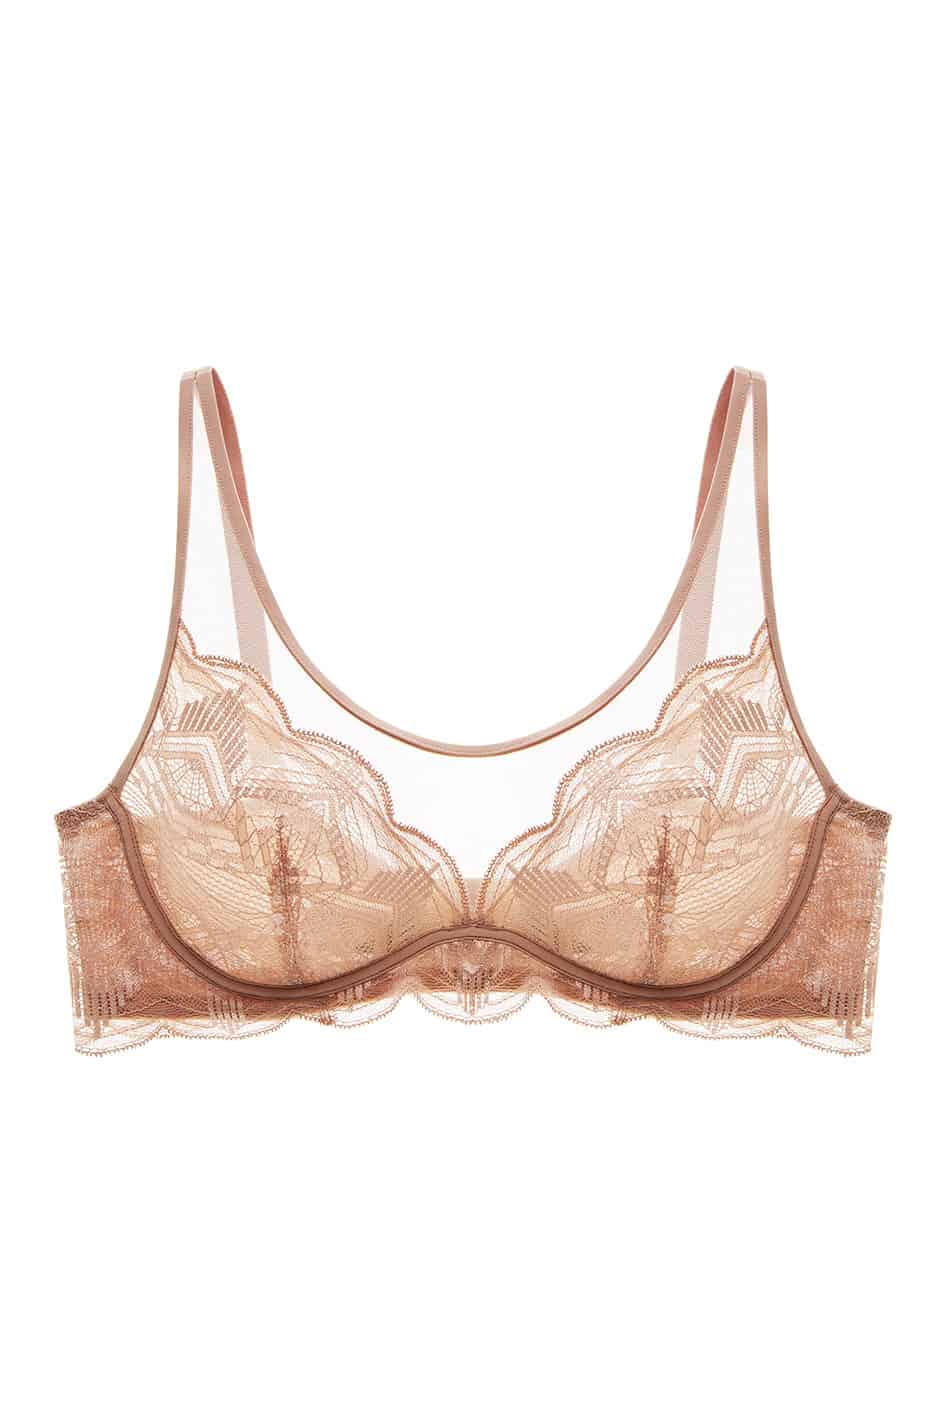 CLEARANCE! Norvell Extreme Support Lace Bra